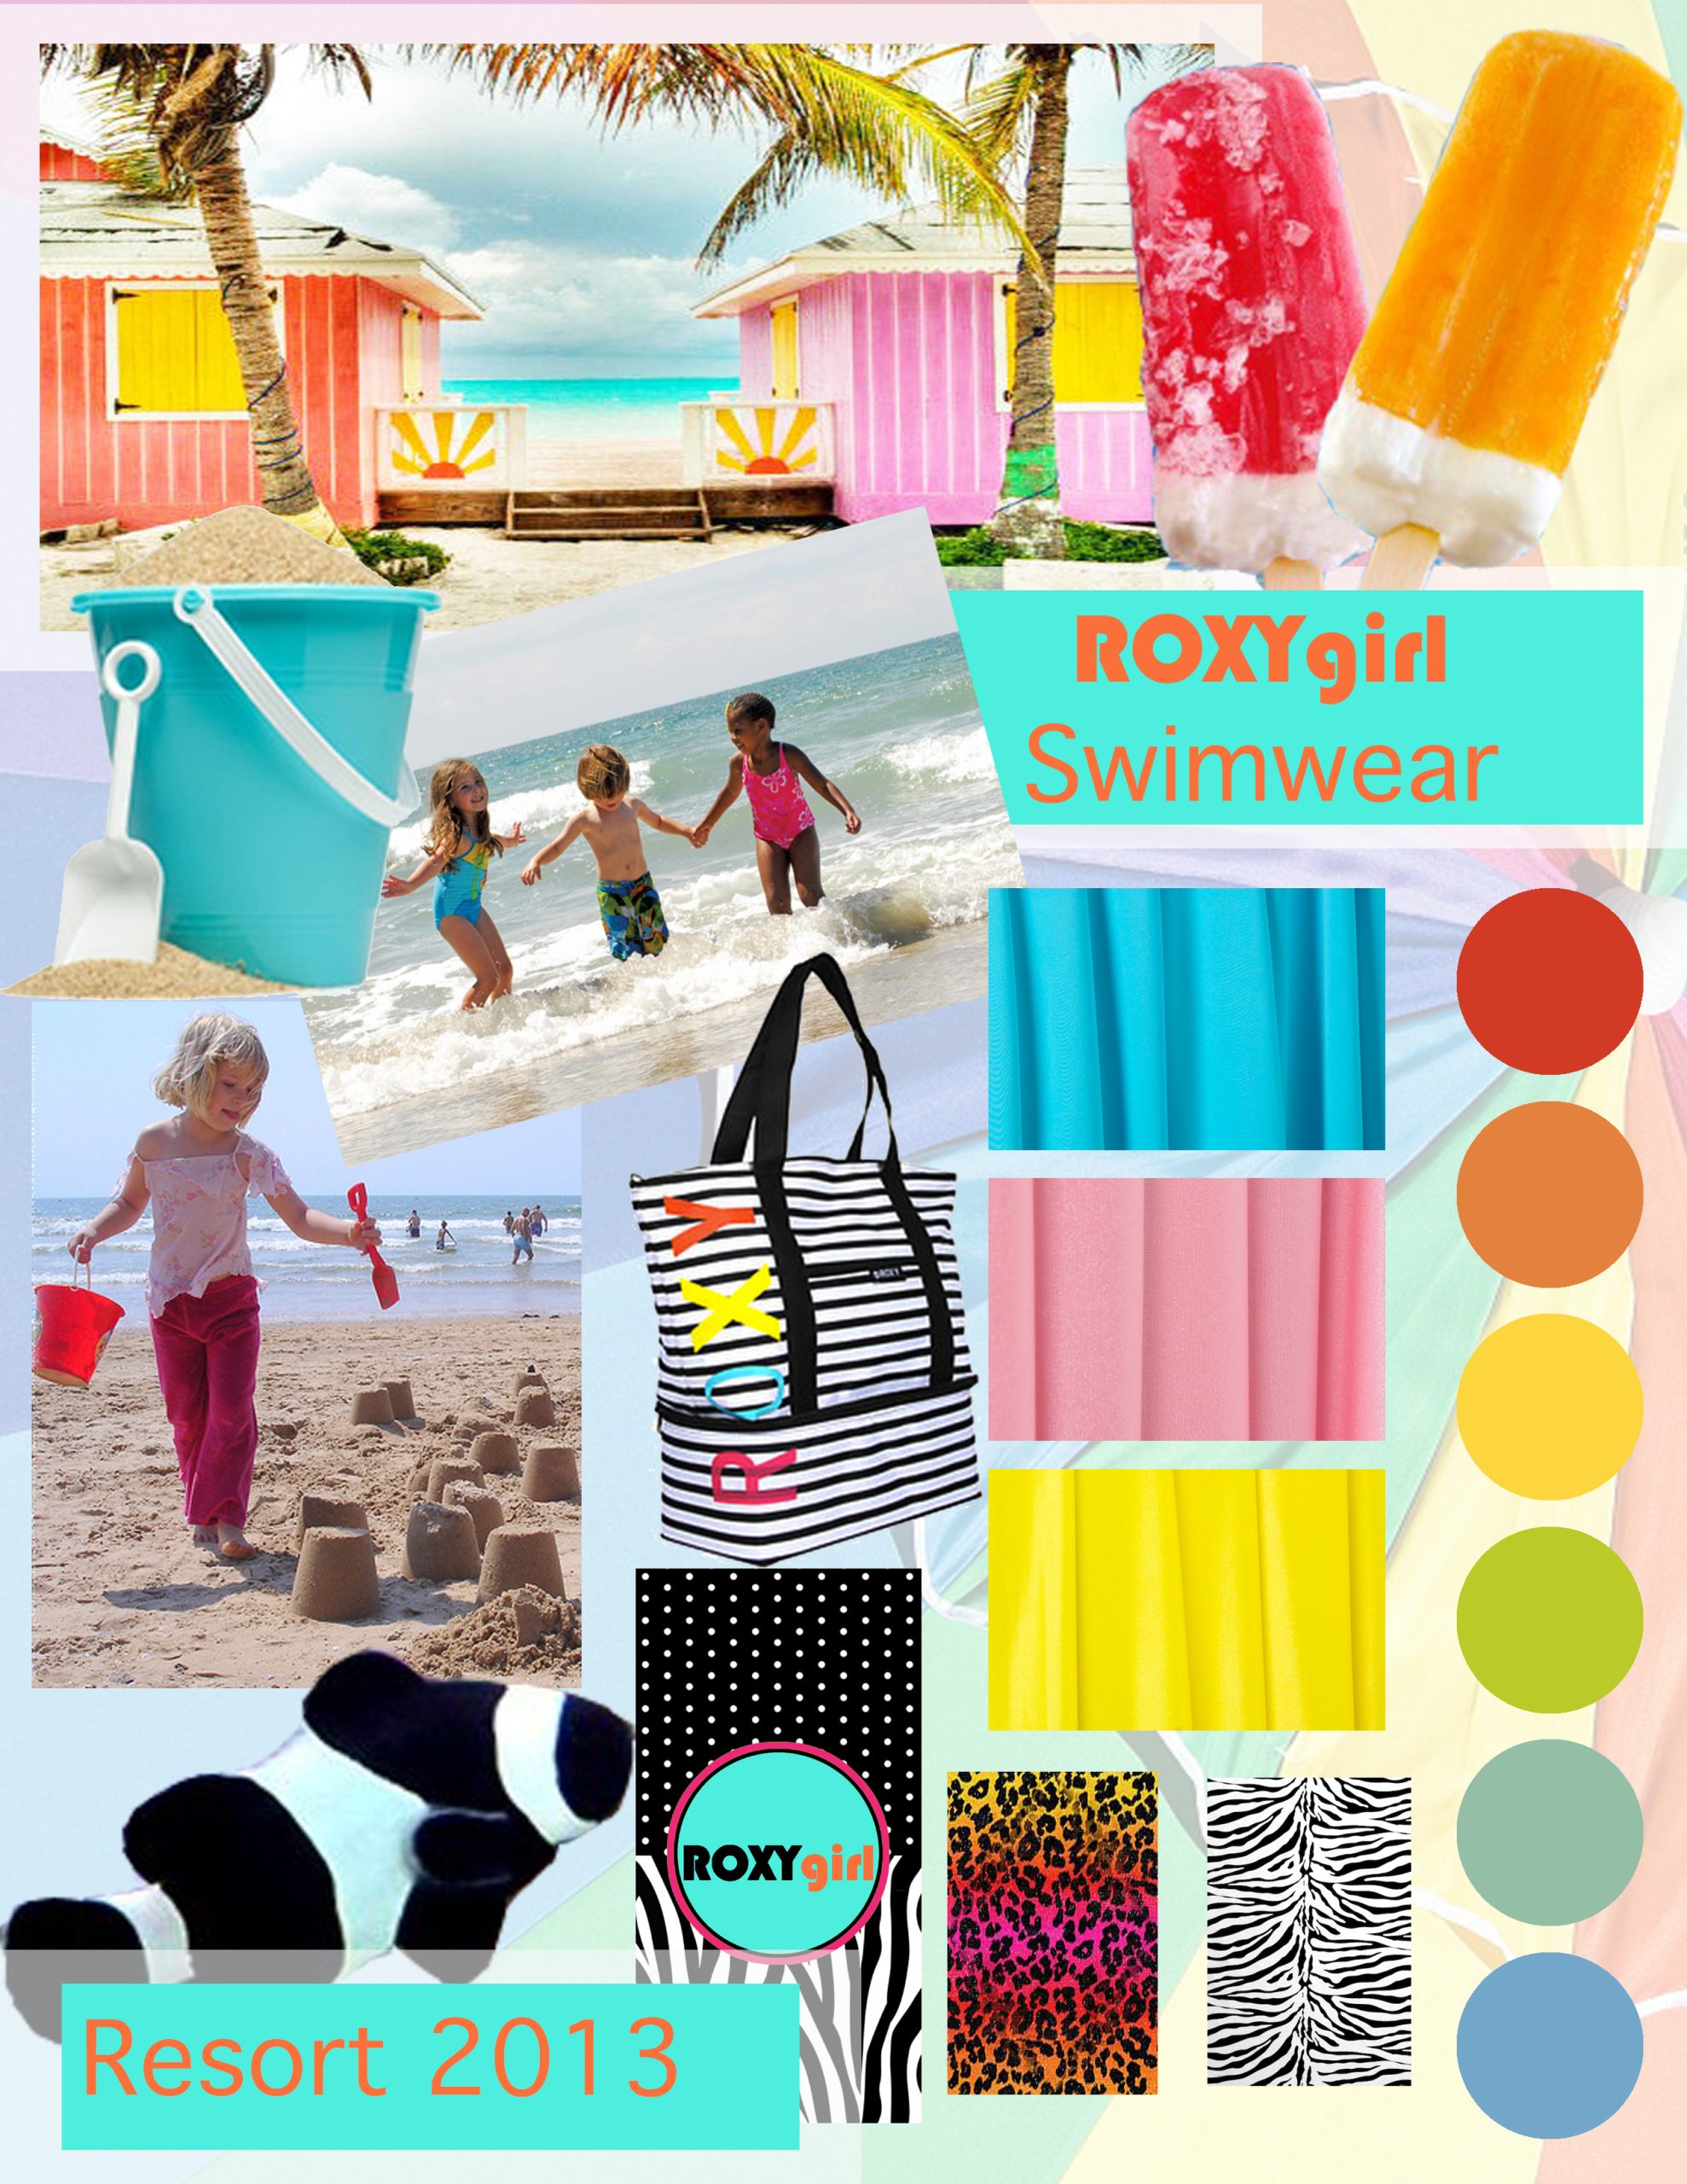 Photos of colorful popsicles and children playing on the beach are presented alongside a set of colors (muted blue, blue-green, chartreuse, yellow, orange, and light red) and patterned prints (leopard and zebra-print).